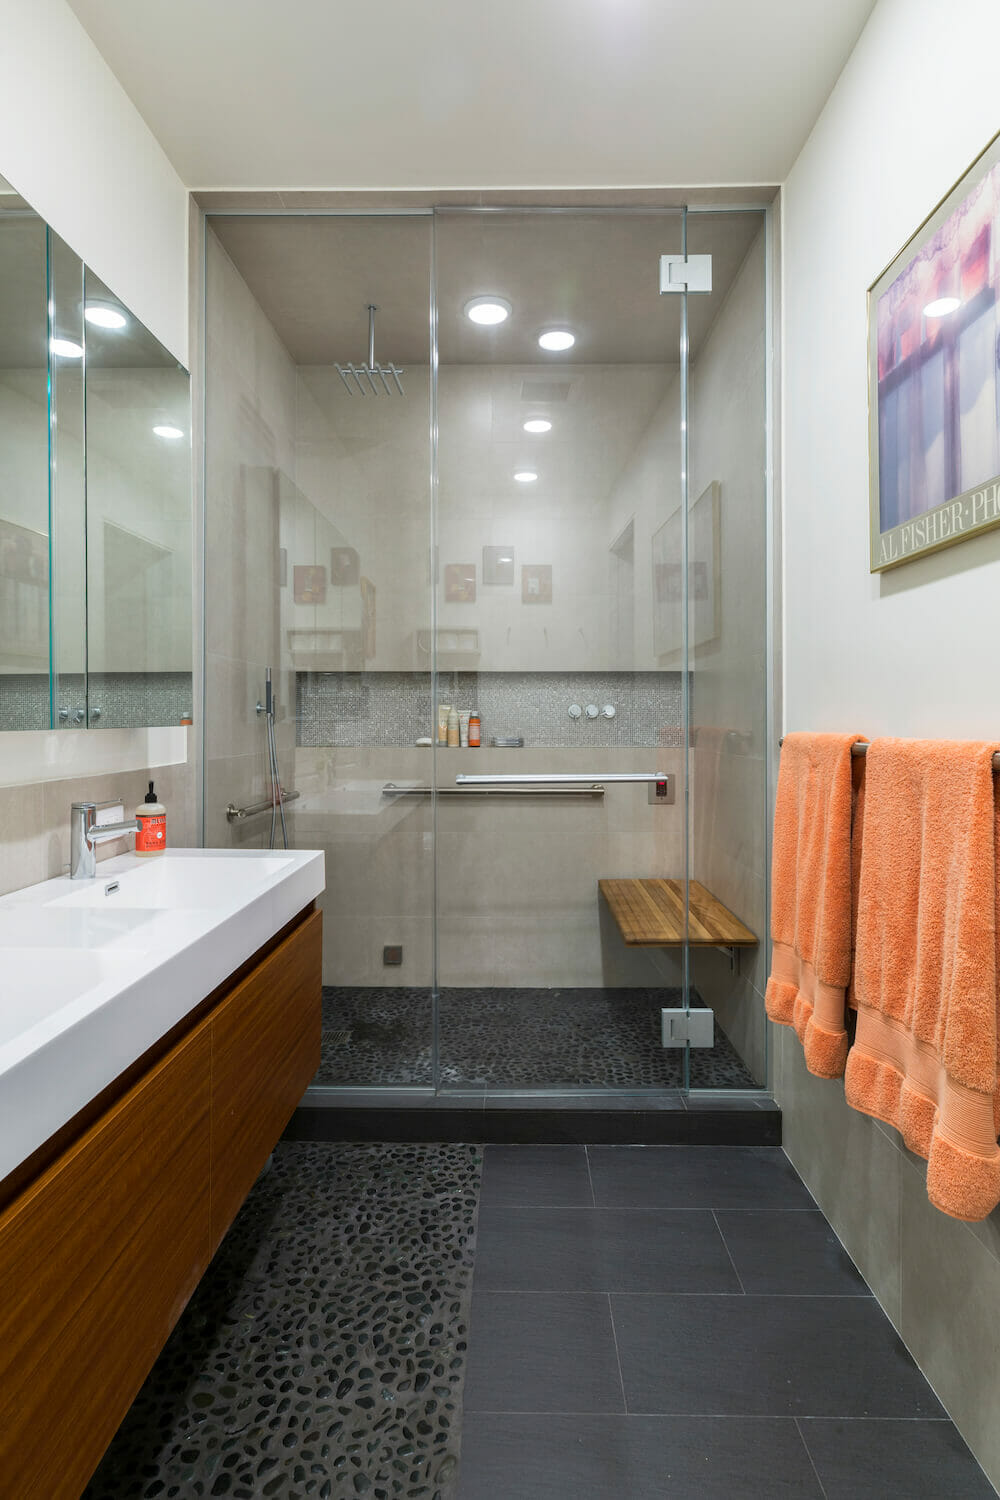 Image of bathroom with stone floor, steam shower and teak bench